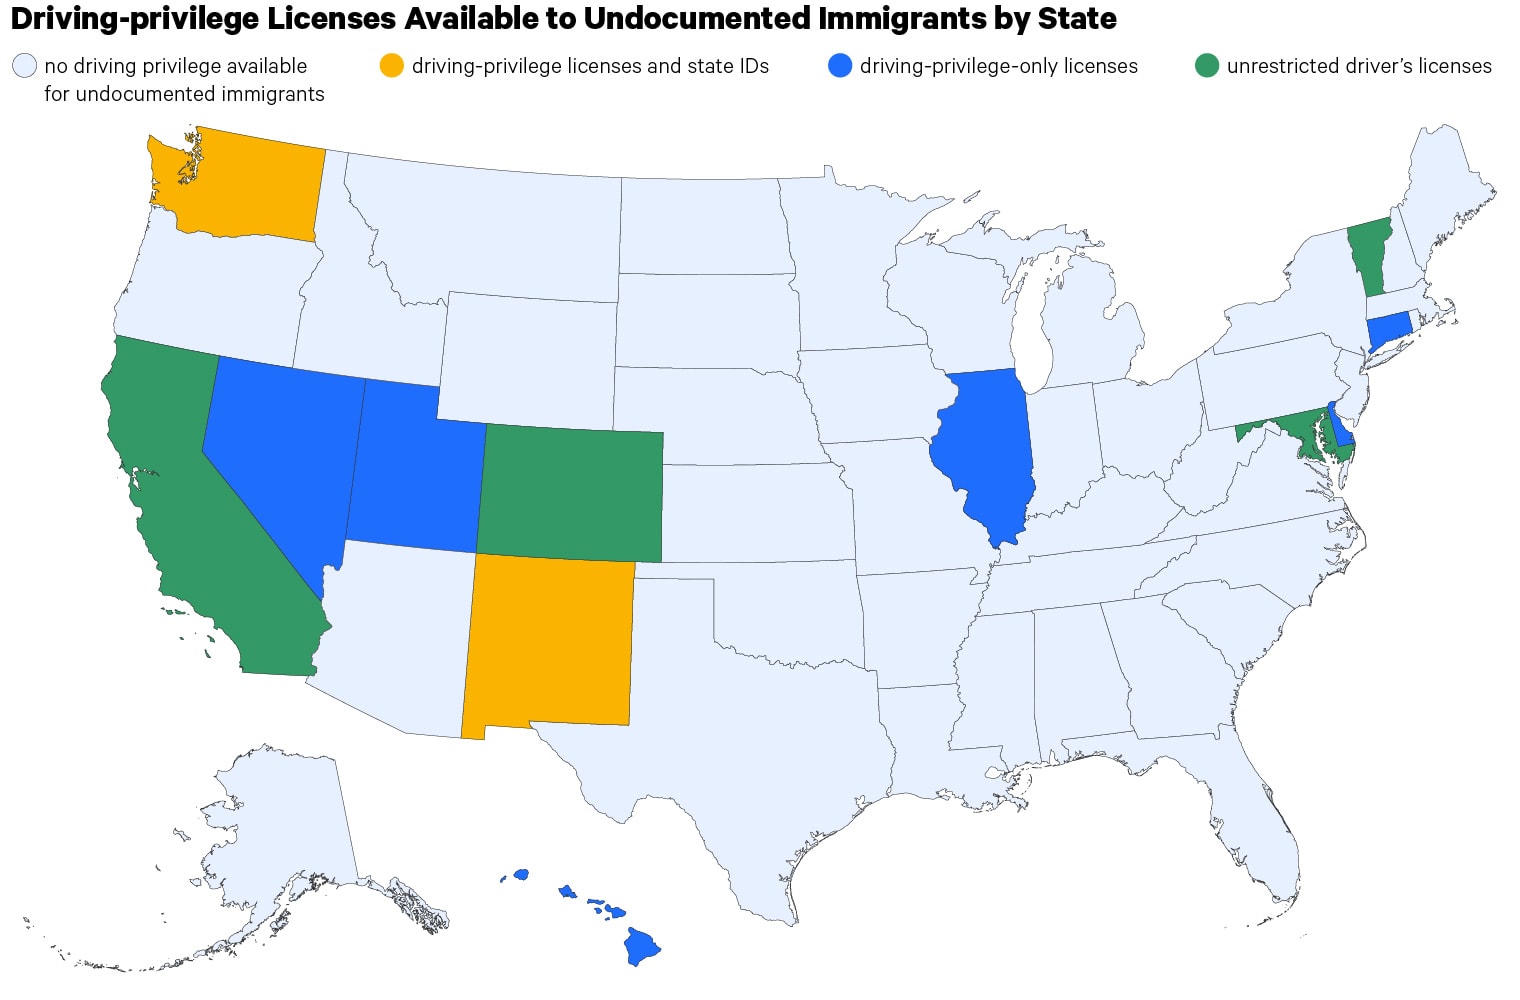 More Than 5,000 Undocumented Residents Sign Up For Drivers License Test